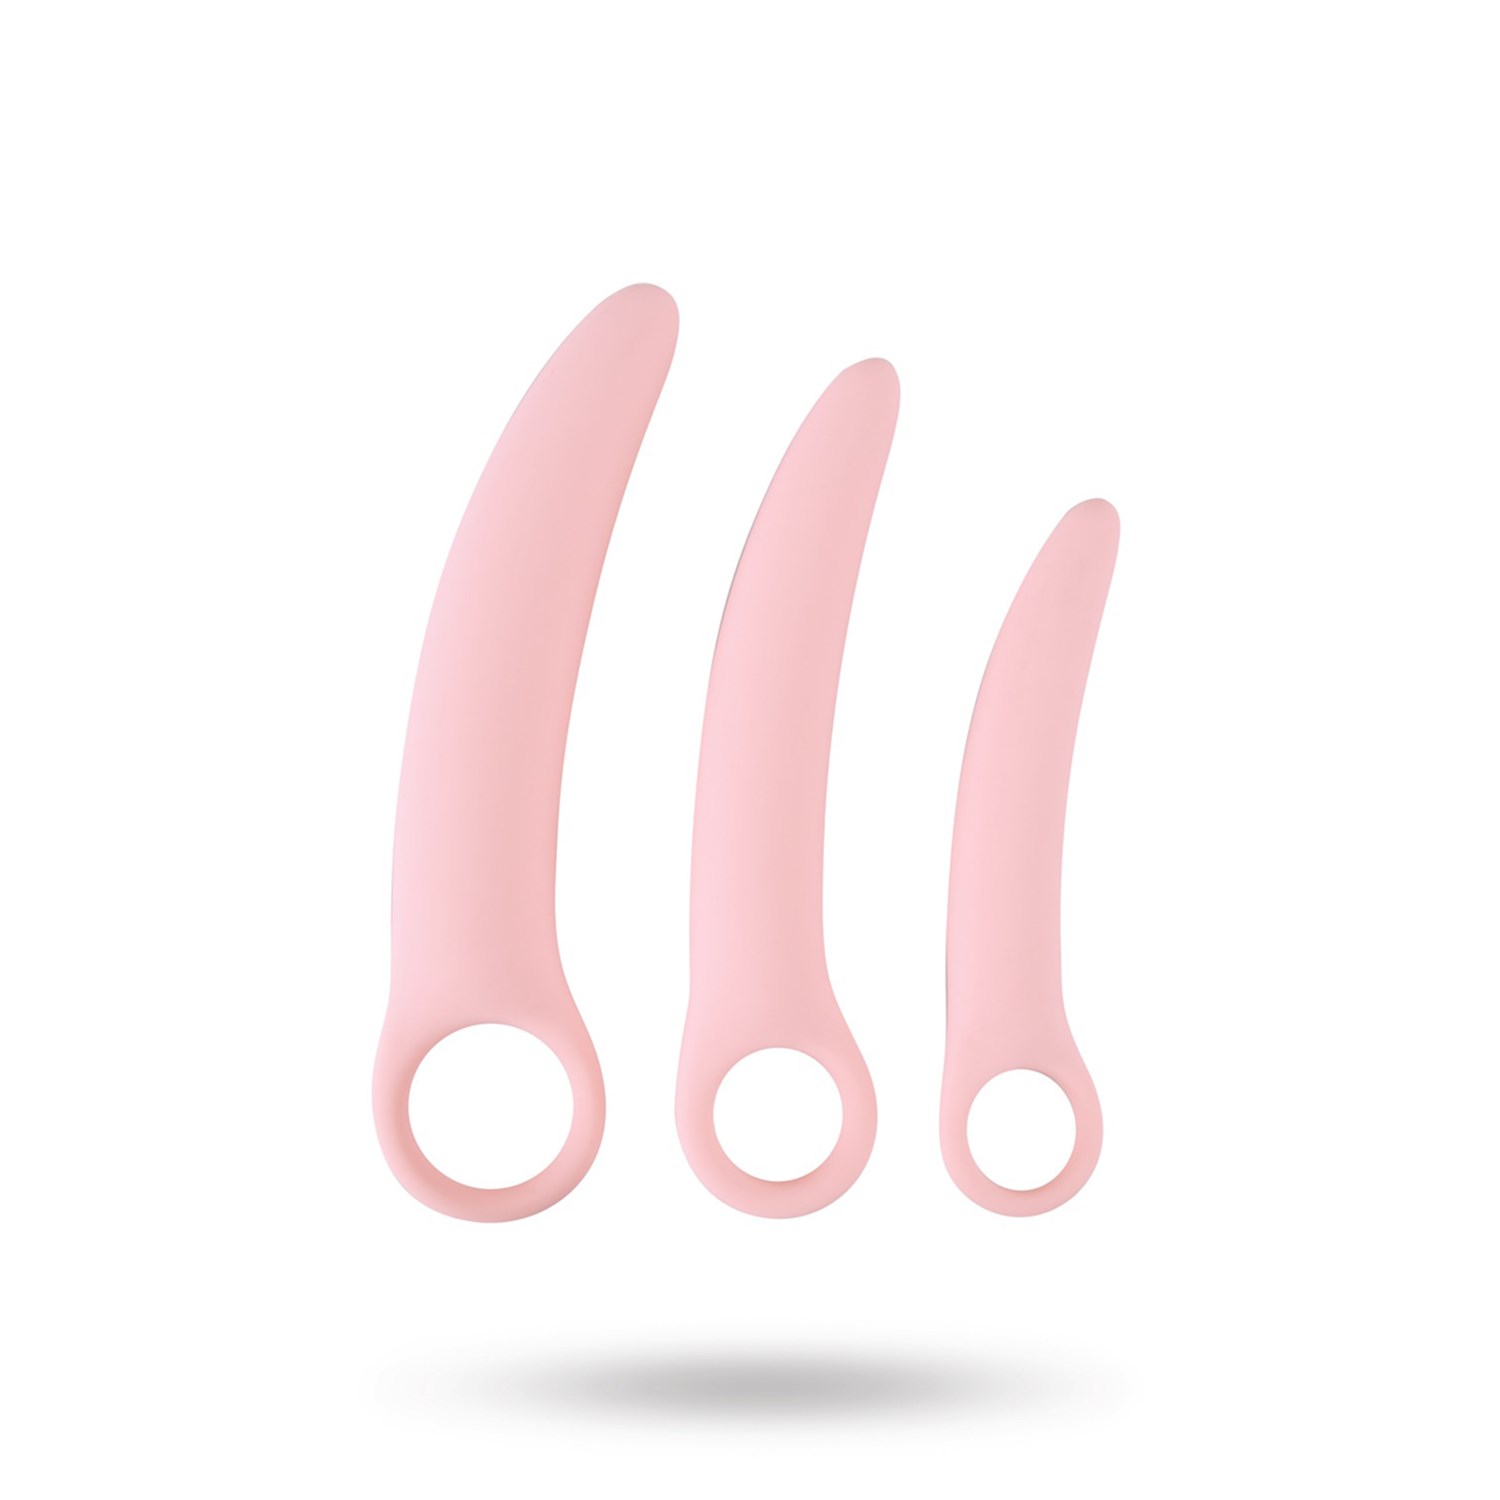 Vaginal & Anal Trainers - Pink